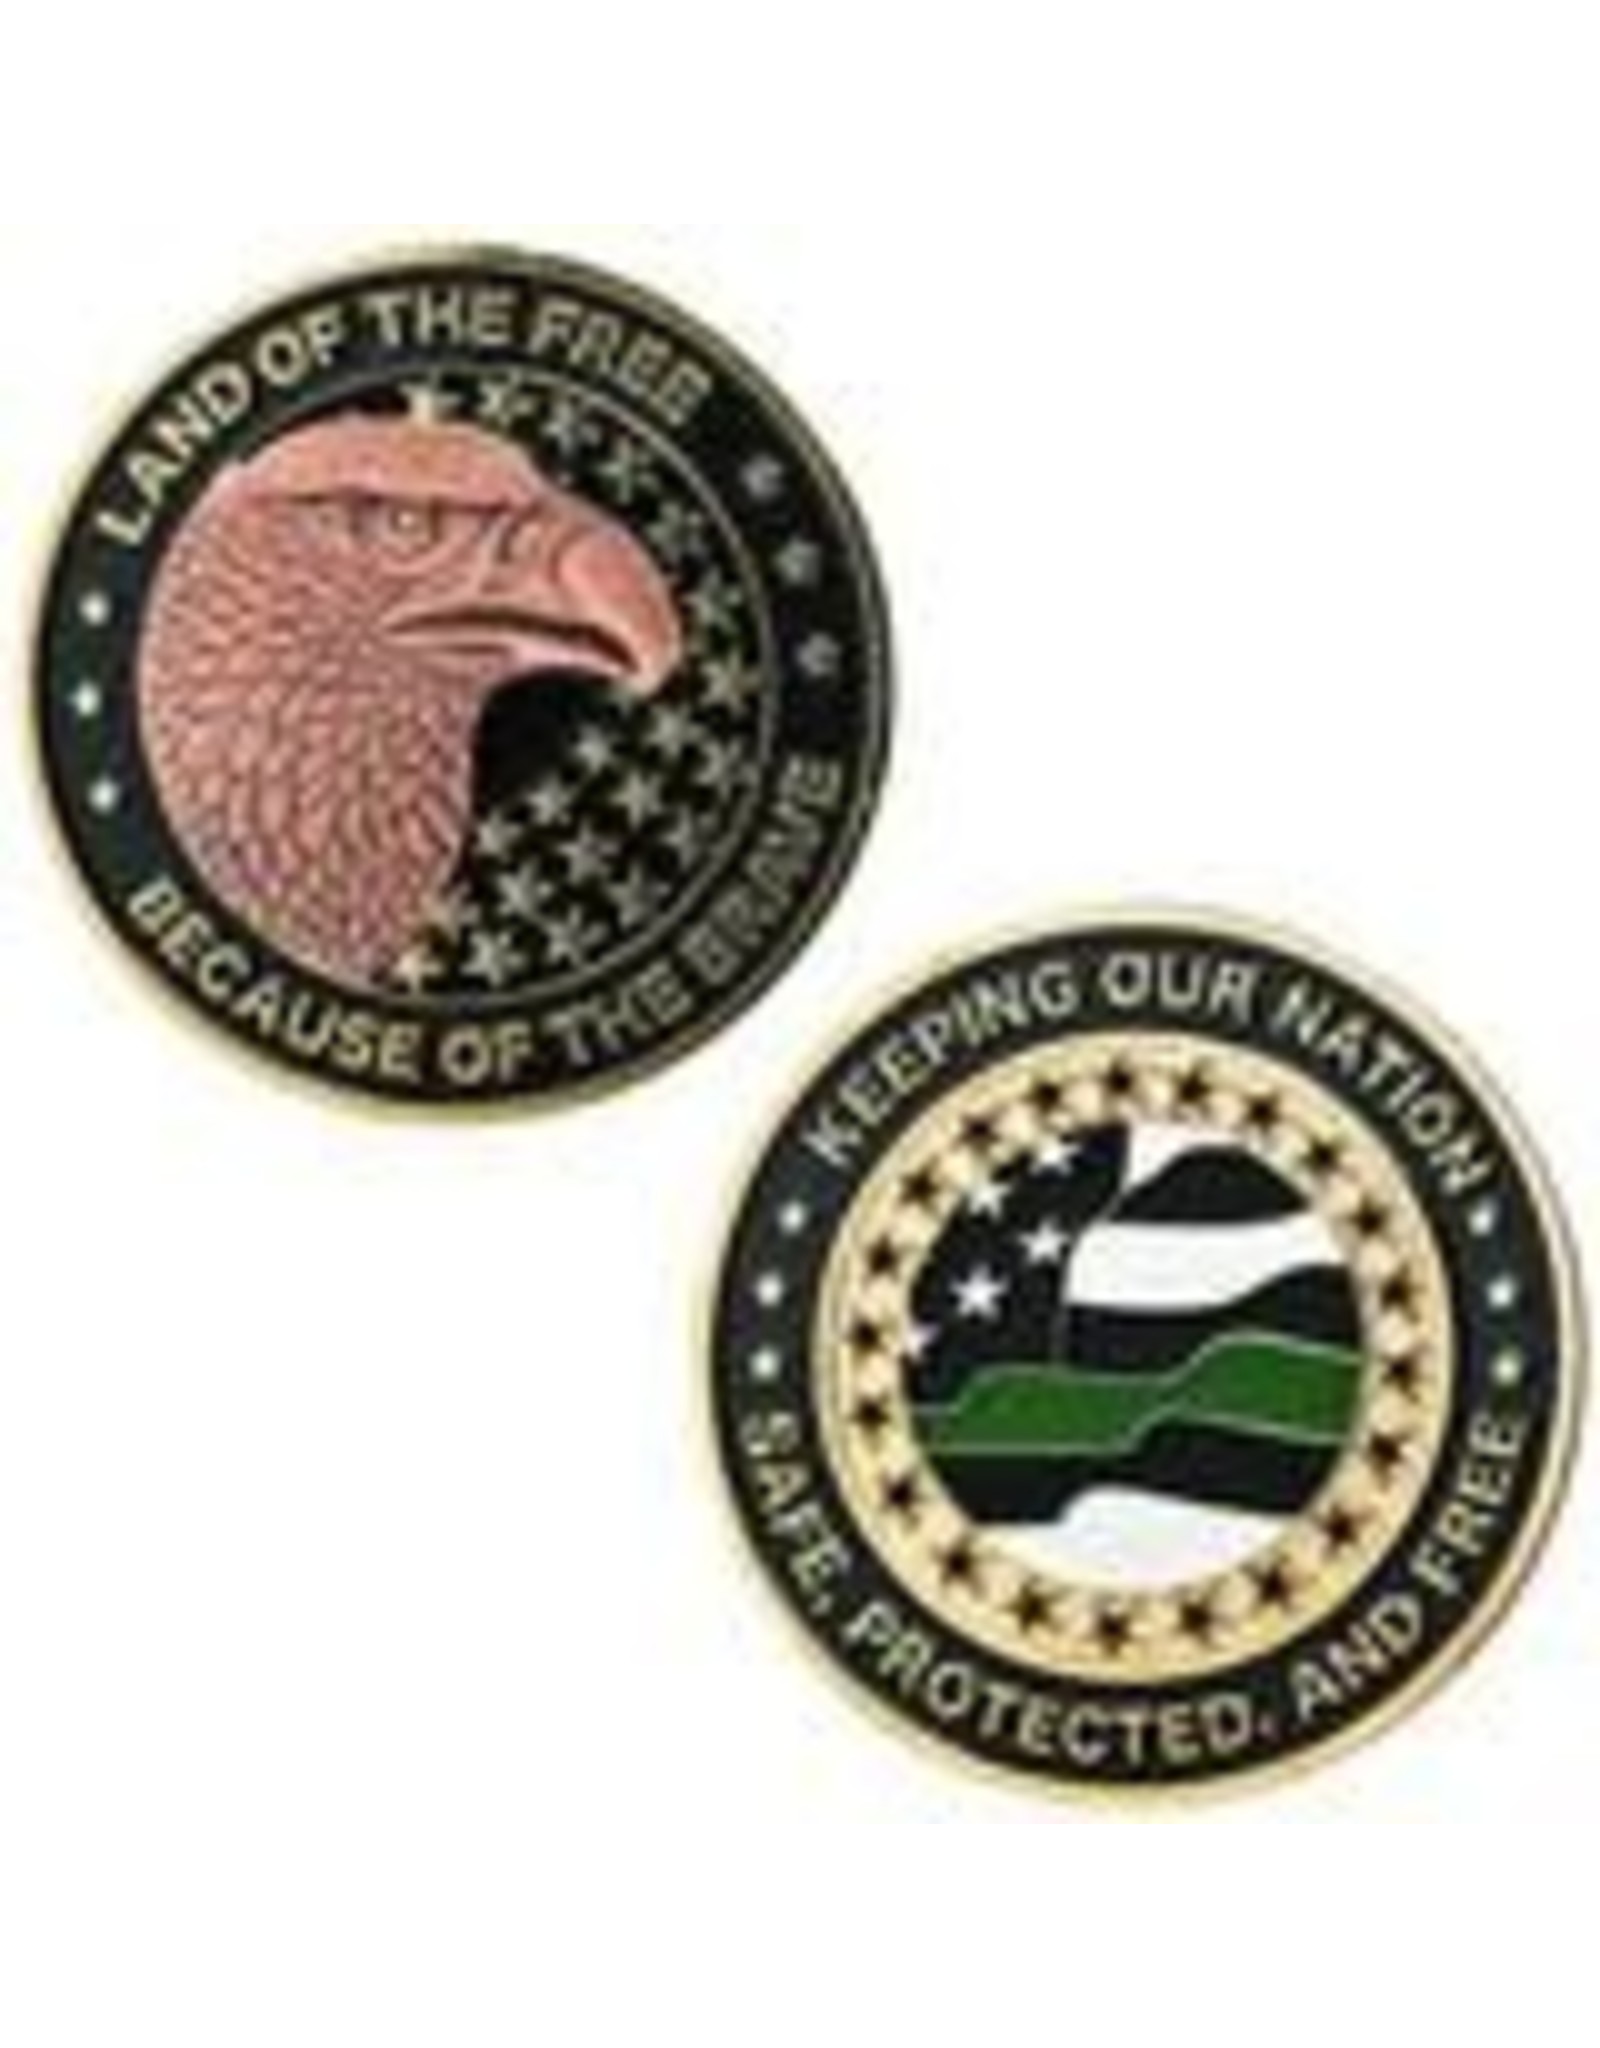 Thin Blue Line USA Challenge Coin - Thin Green - Keeping Our Nation Safe, Protected, and Free